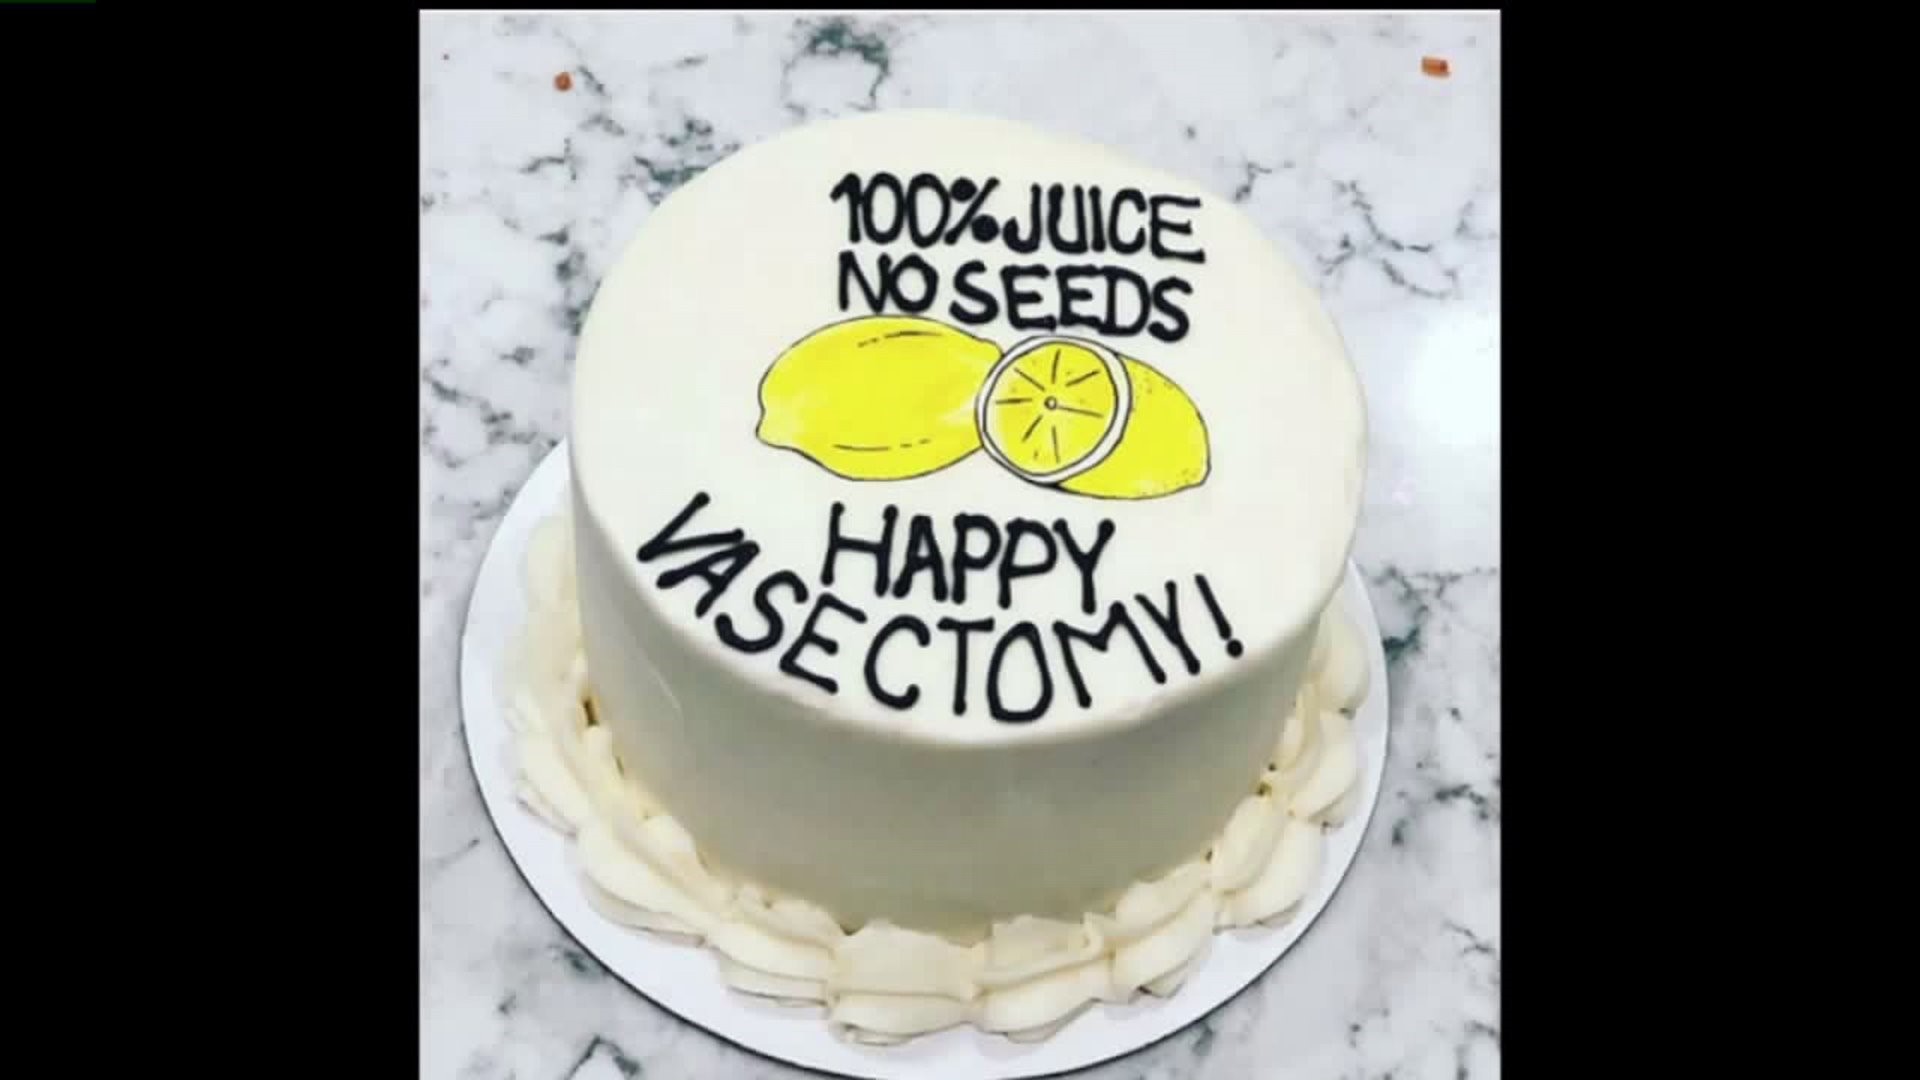 Check out these hilarious, viral vasectomy cakes